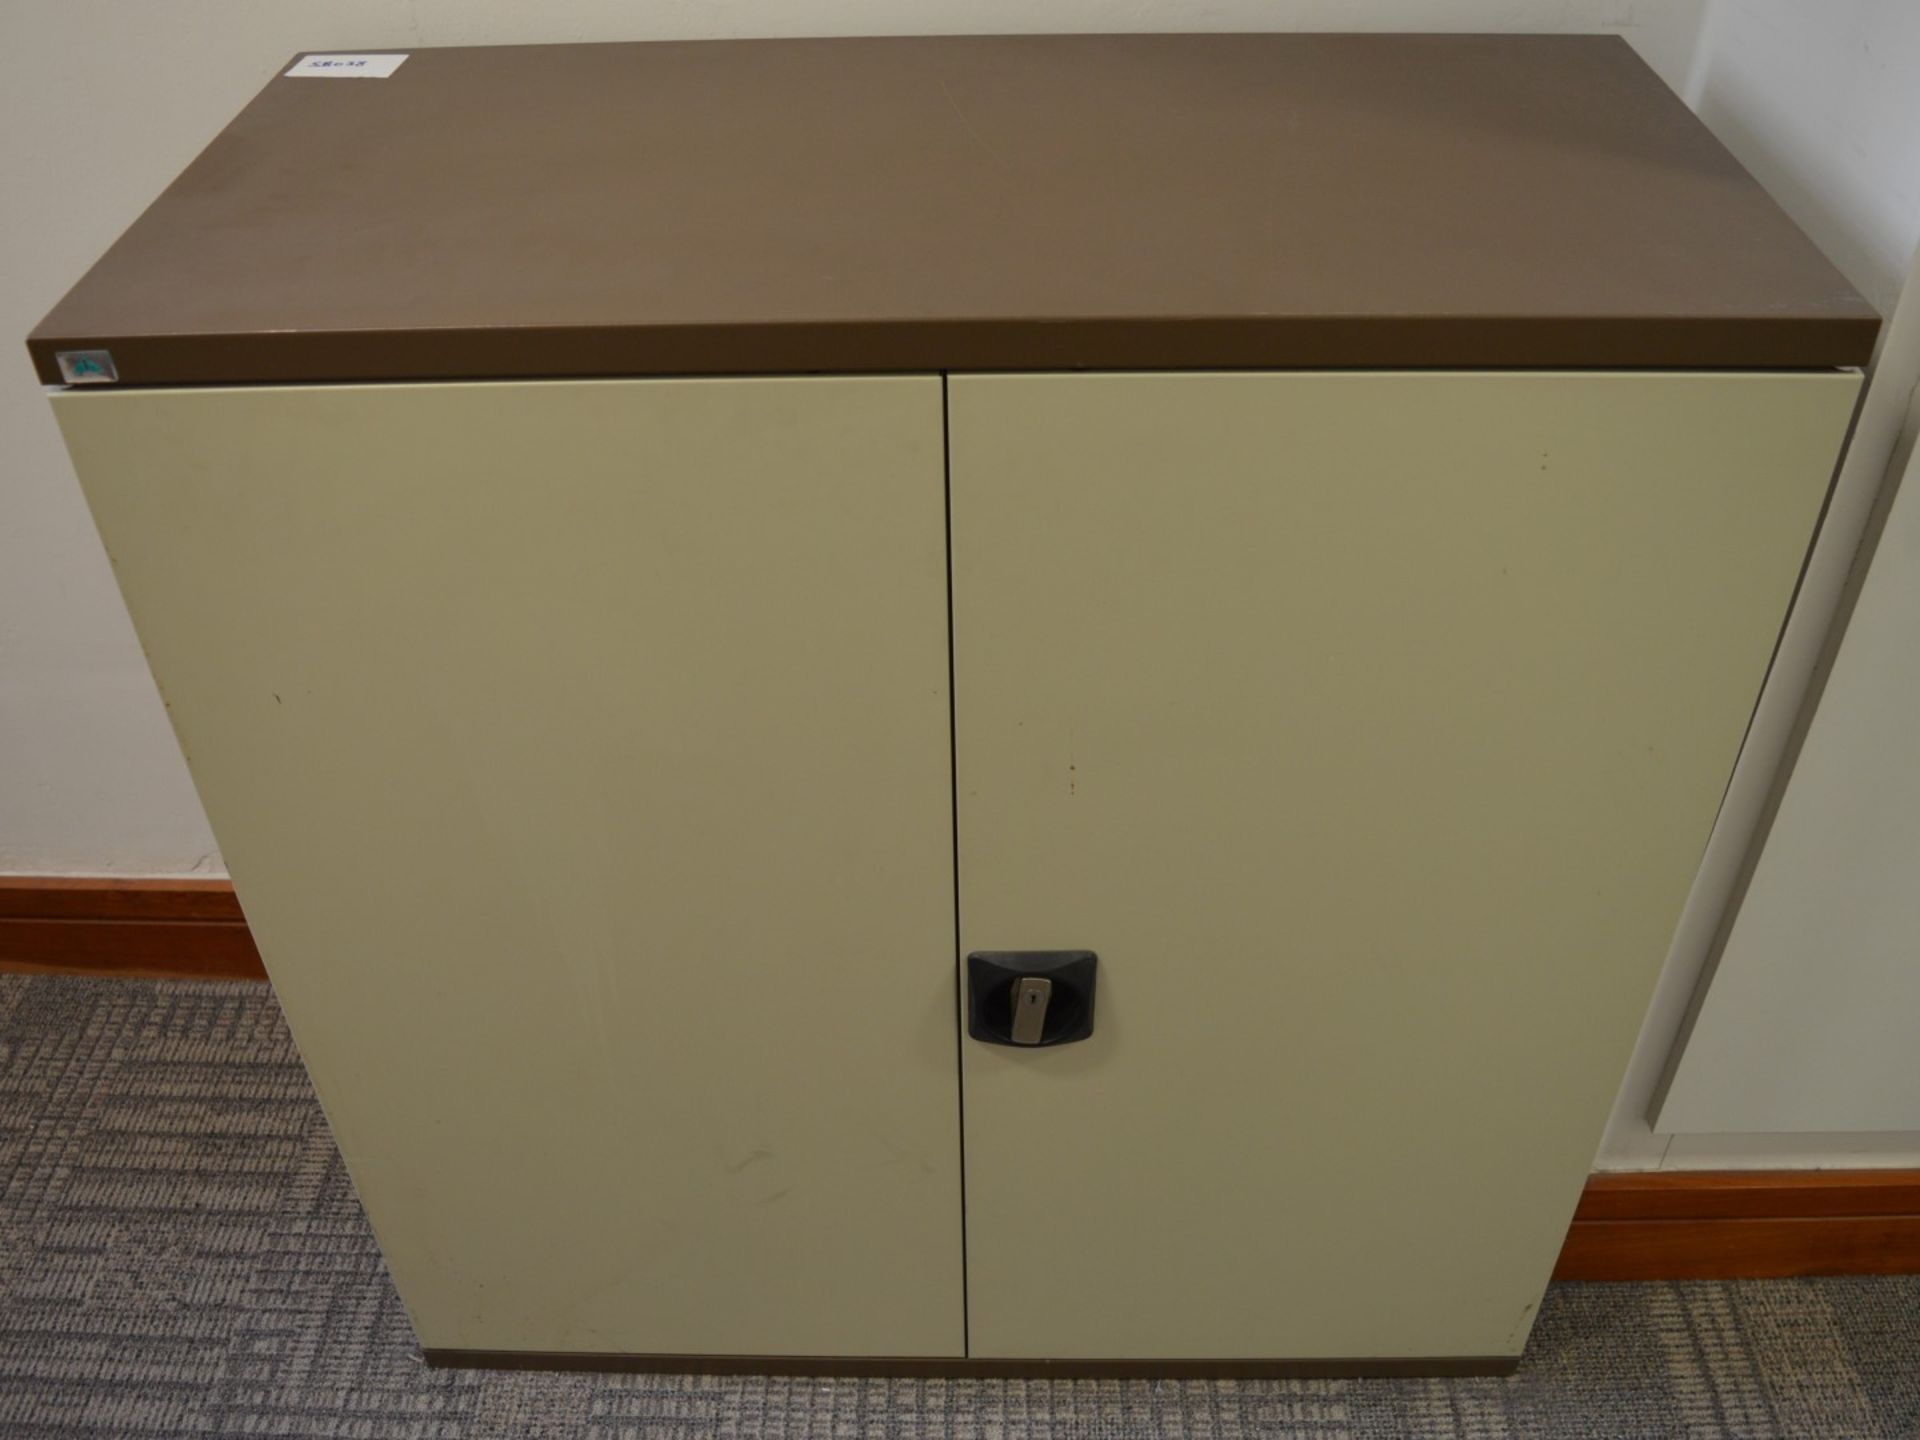 1 x Office Storage Cabinet - Brown and Beige Finish - Key NOT Included - H101 x W96 x D46 cms - - Image 4 of 4